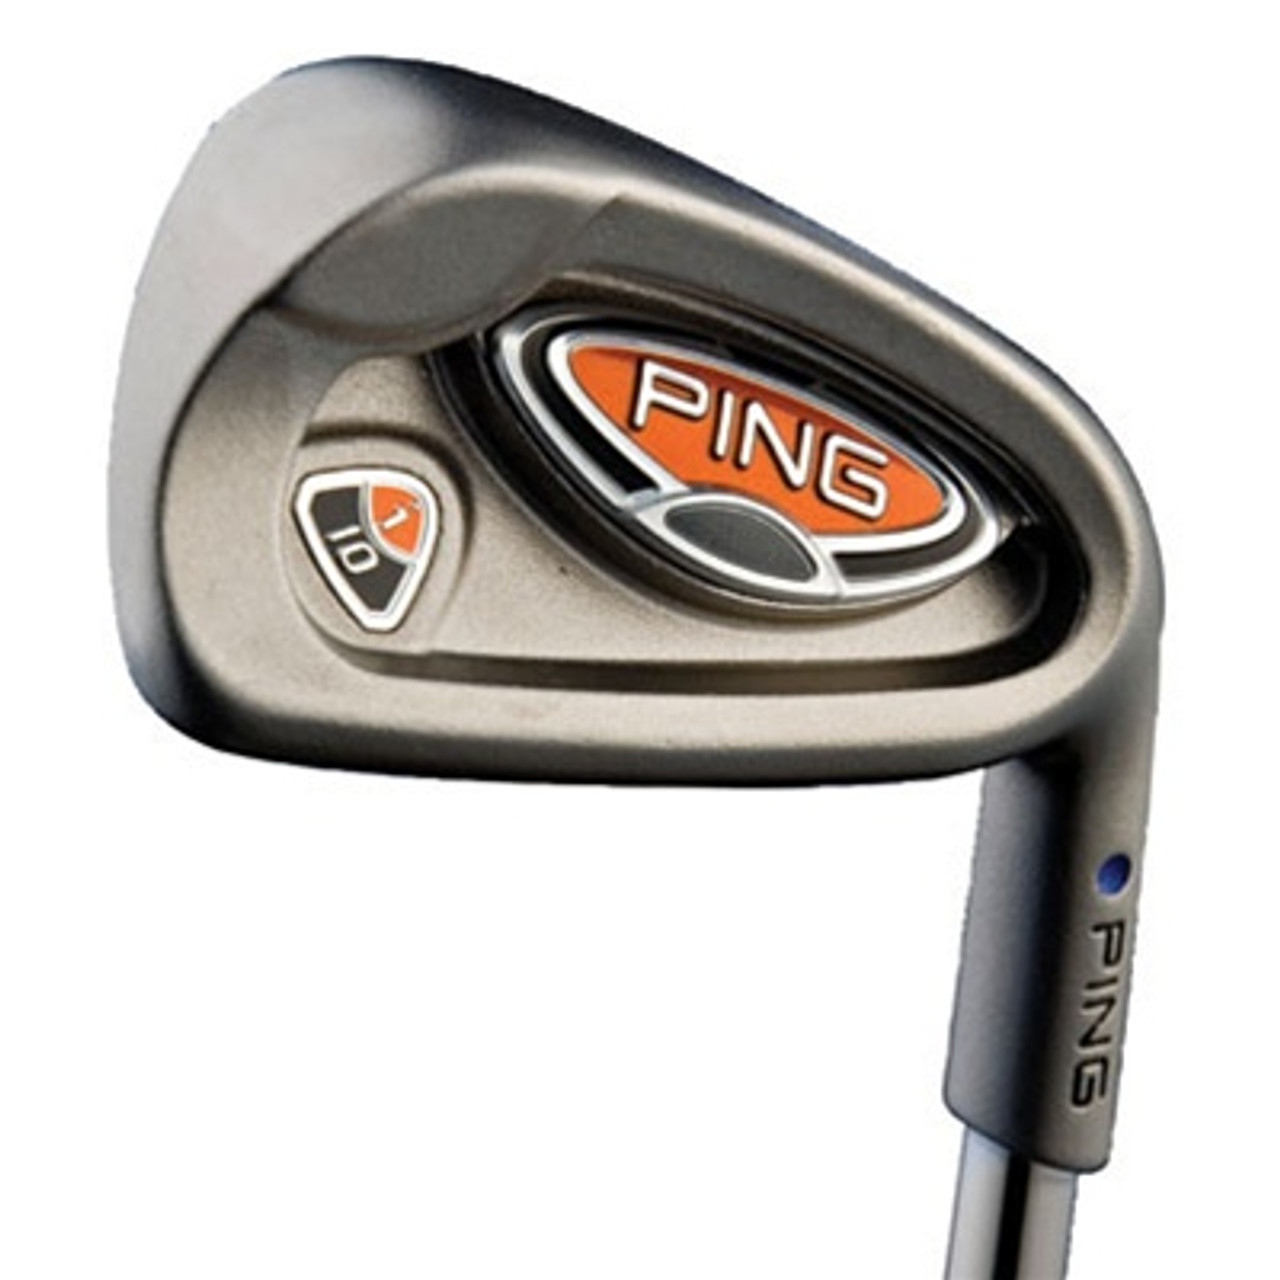 PING Men's i10 Individual Irons - REPLACEMENT IRONS ONLY